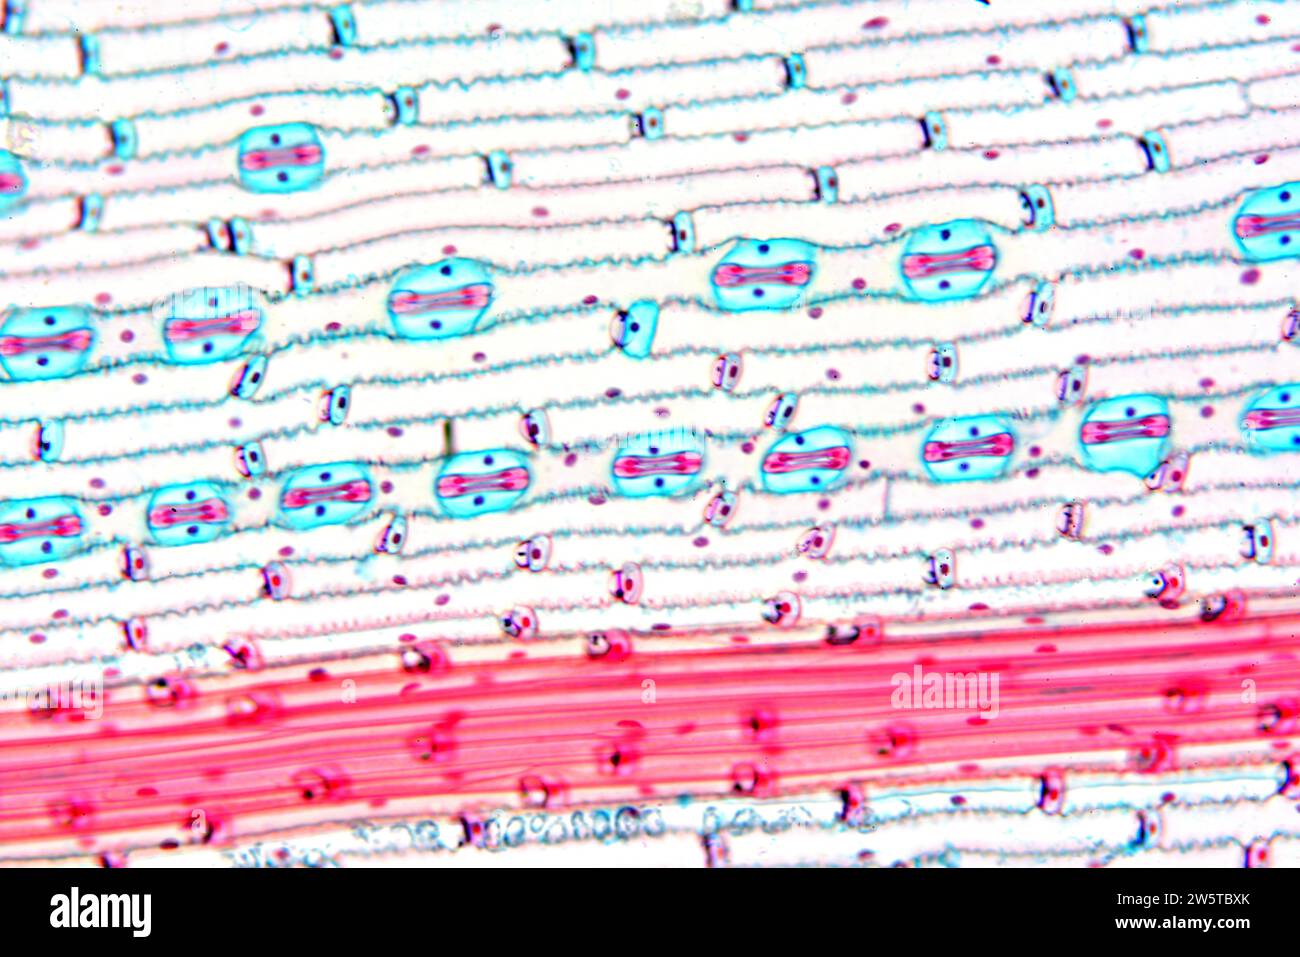 Stomata on a wheat leaf (Triticum durum). Photomicrograph X100 at 10 cm wide. Stock Photo